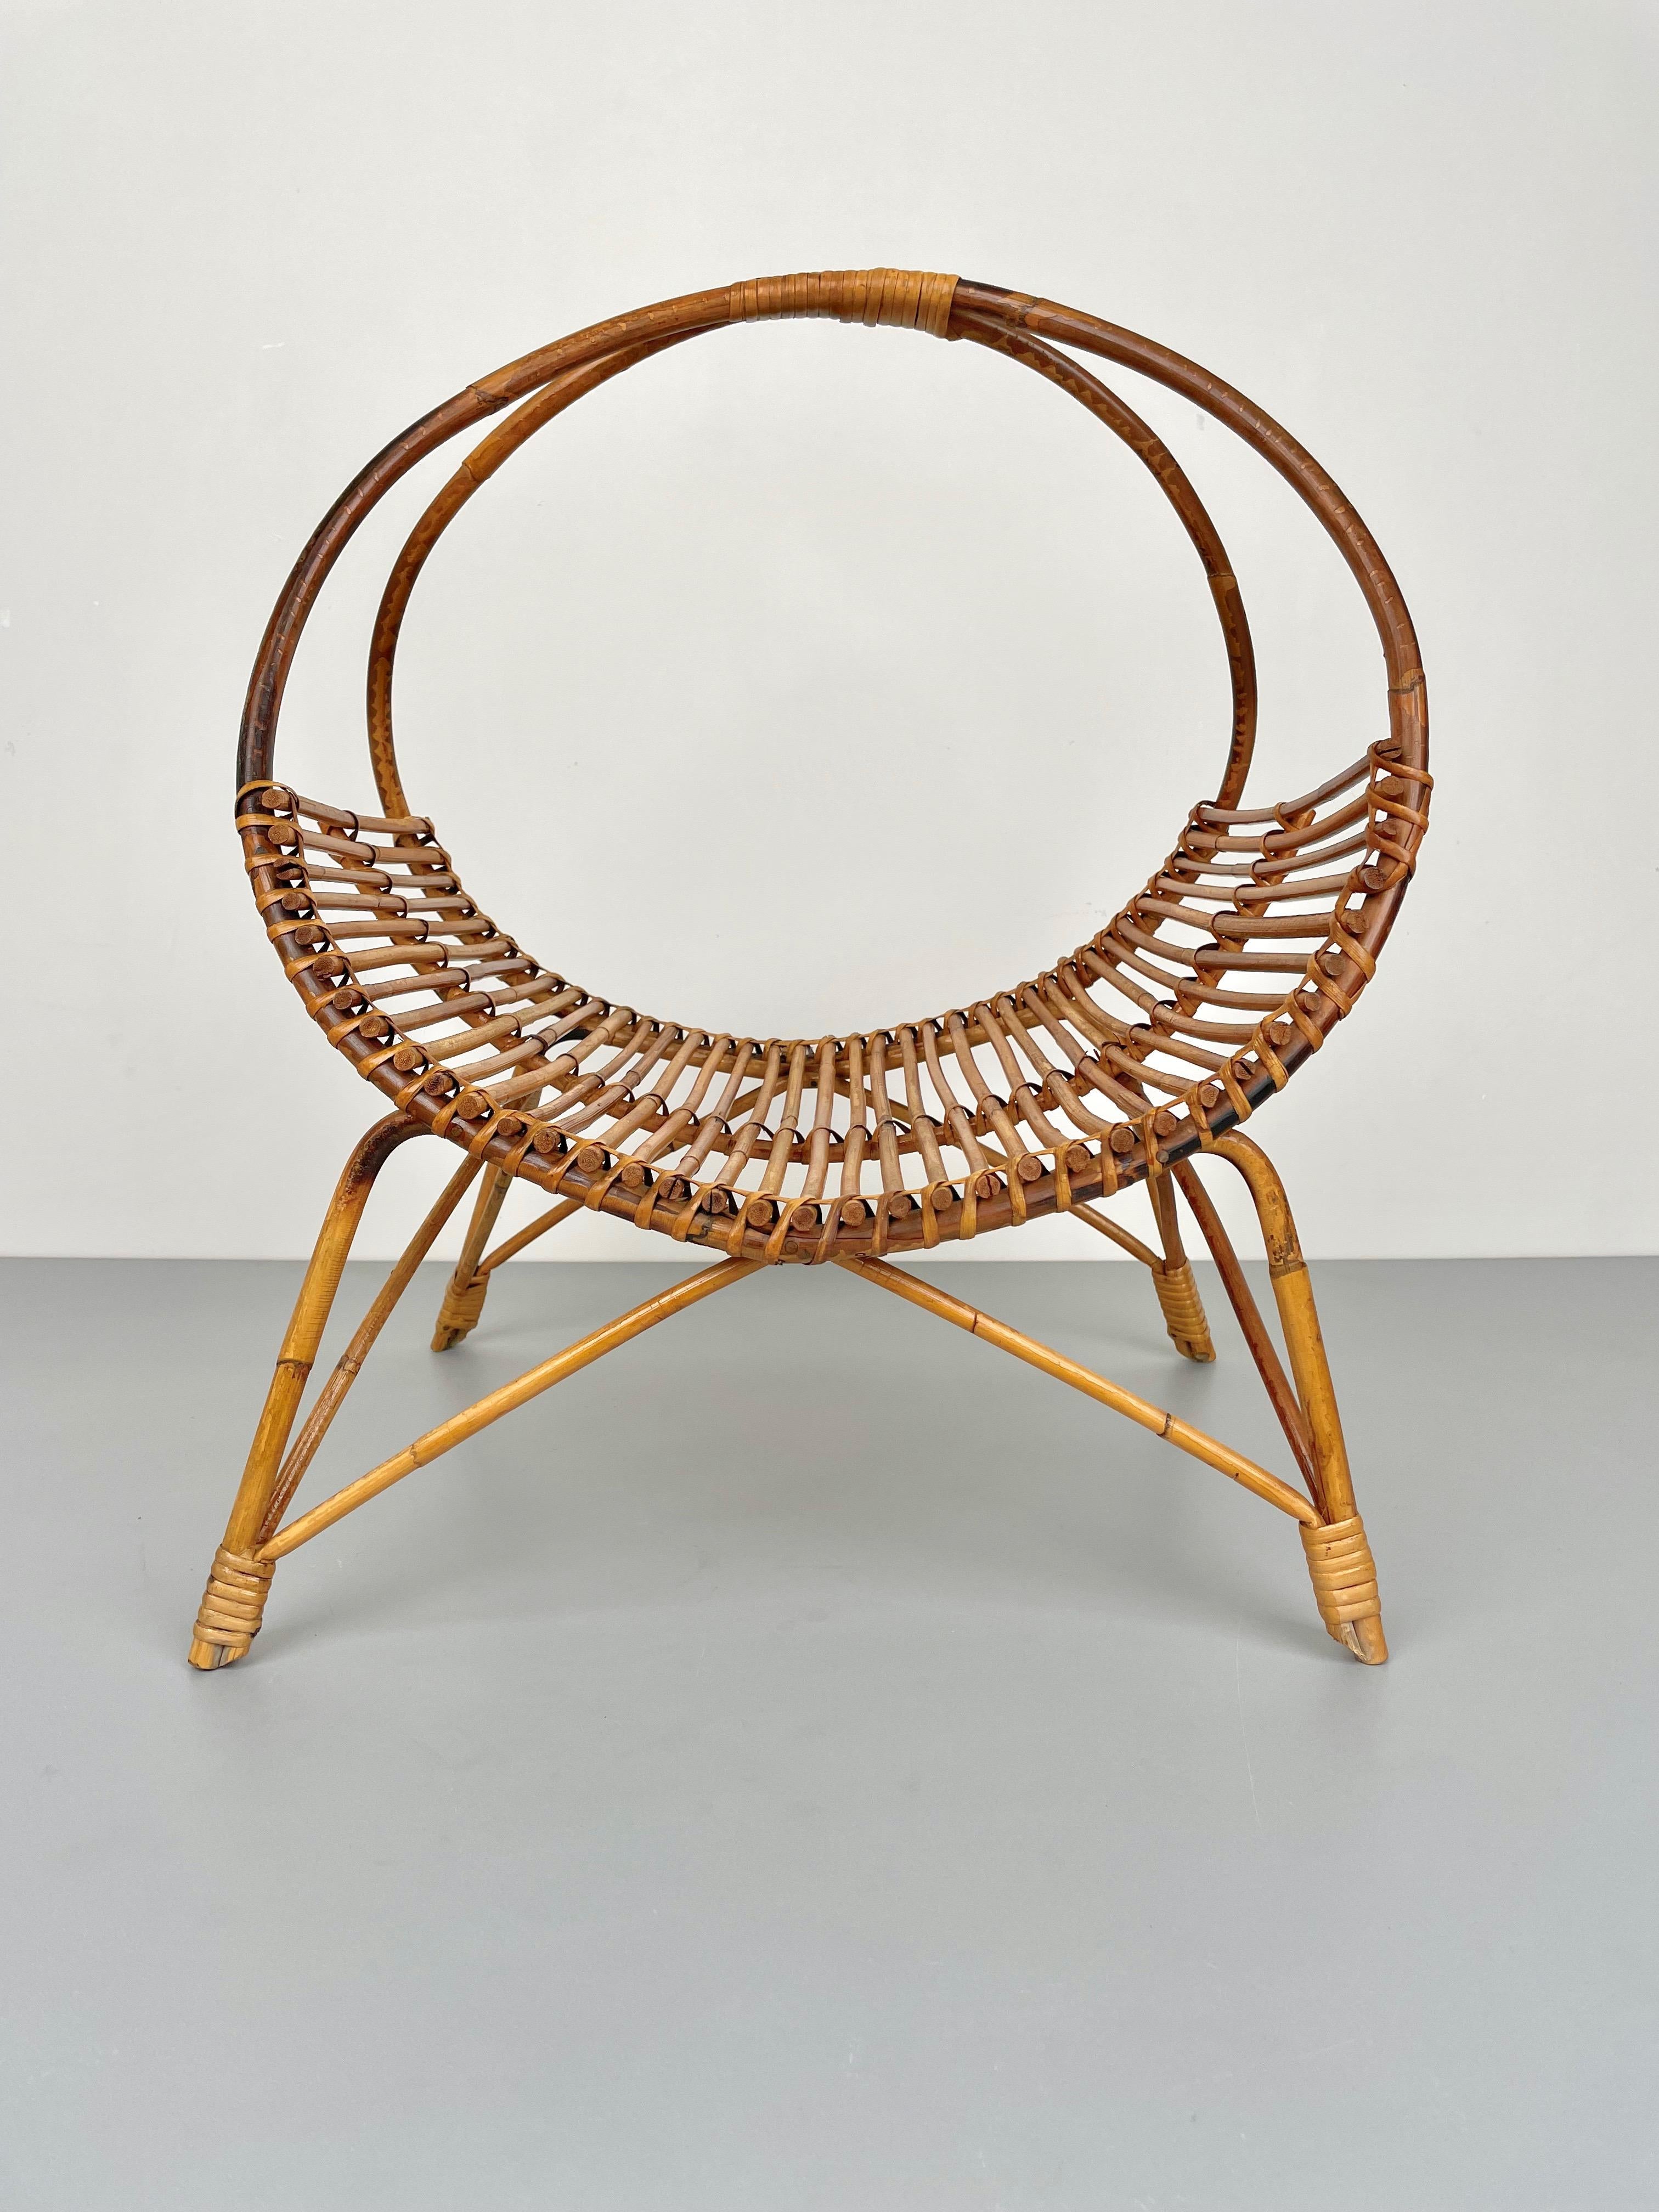 Rattan & Bamboo Curved Magazine Rack, Italy, 1960s For Sale 5